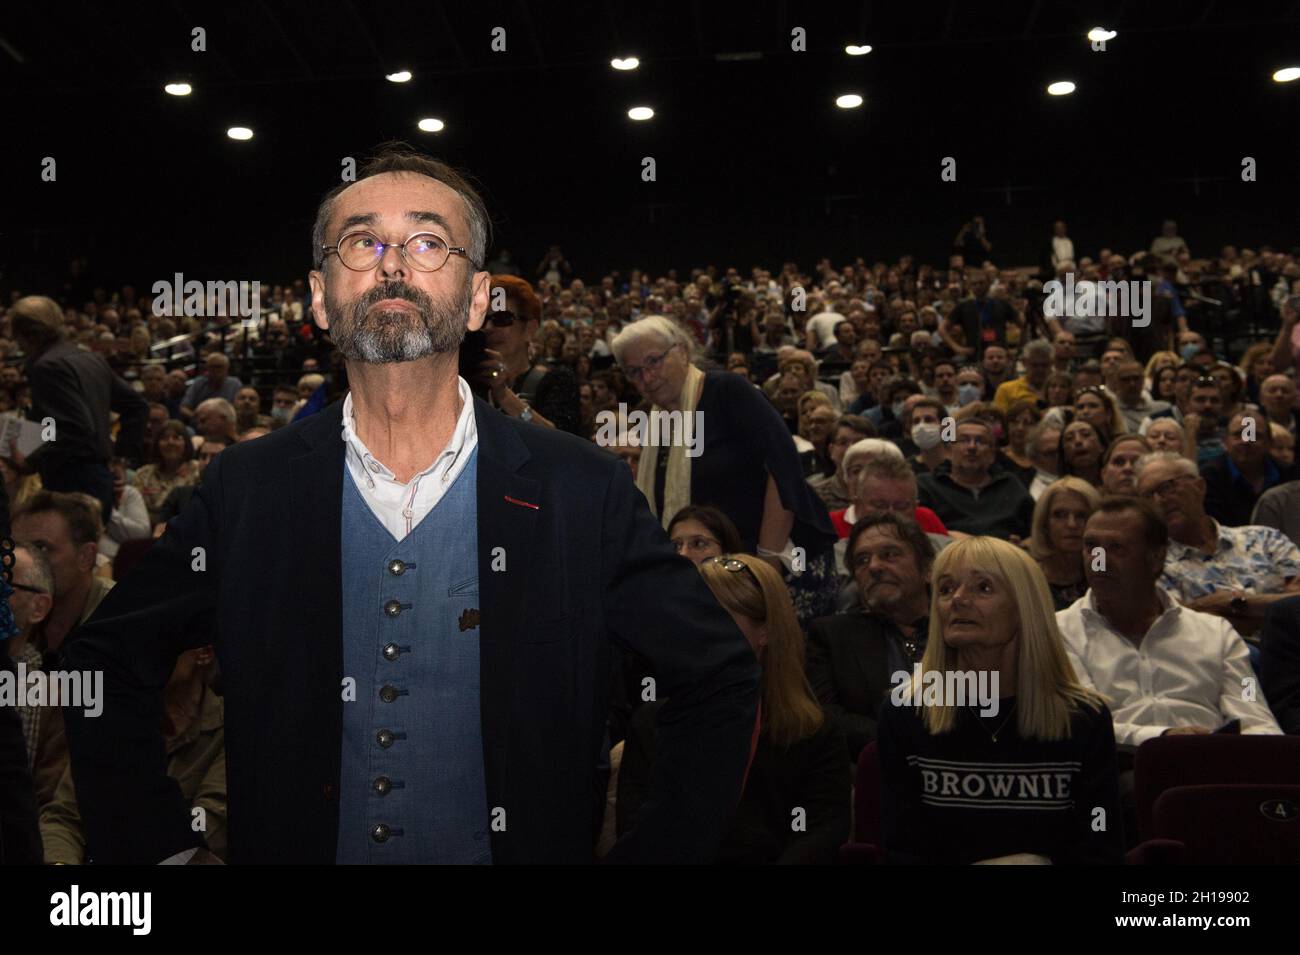 Beziers, France. 16th Oct, 2021. Robert Menard seen in the place of the meeting with the audience in the background.Robert Menard, close to the Rassemblement National of Marine Le Pen has invited Eric Zemmour to a dedication meeting on October 16, 2021. He insisted in his speech in a necessary alliance between Marine Le Pen and Eric Zemmour to make win the camp of the 'national right'. Credit: SOPA Images Limited/Alamy Live News Stock Photo